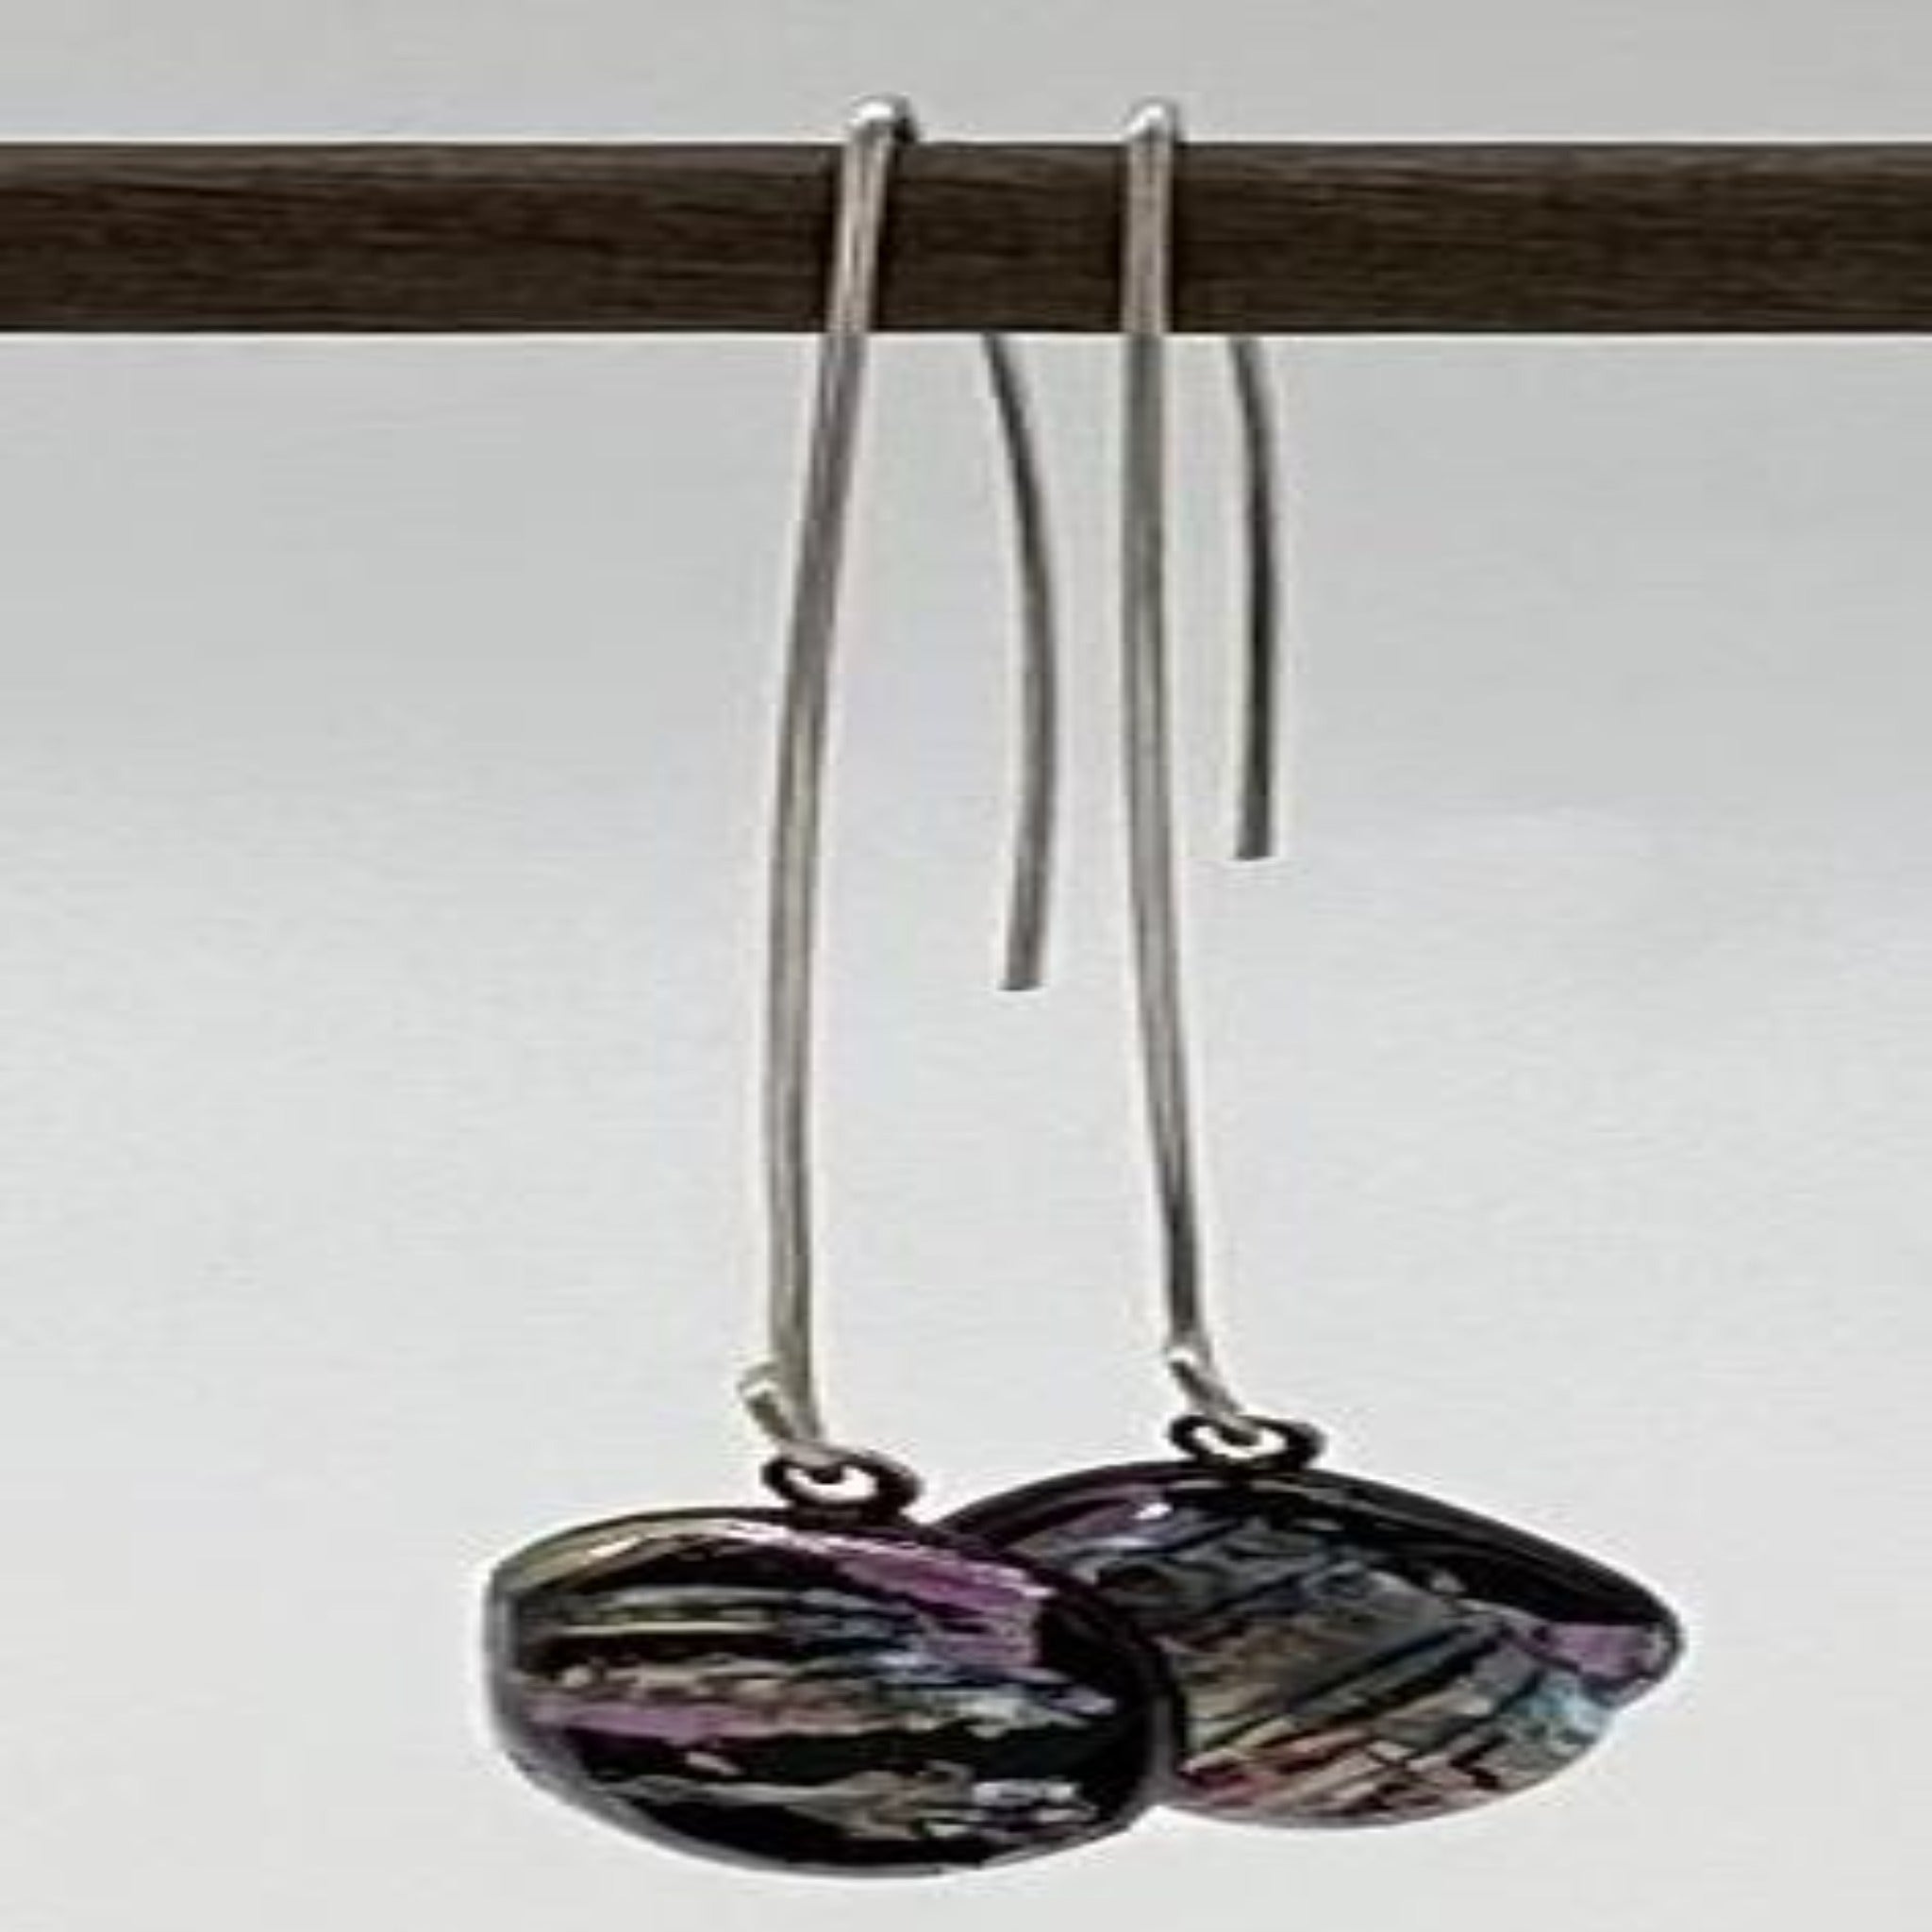 long hoop black and lavender recycled glass earrings by NJ artist Mother's Whimsy